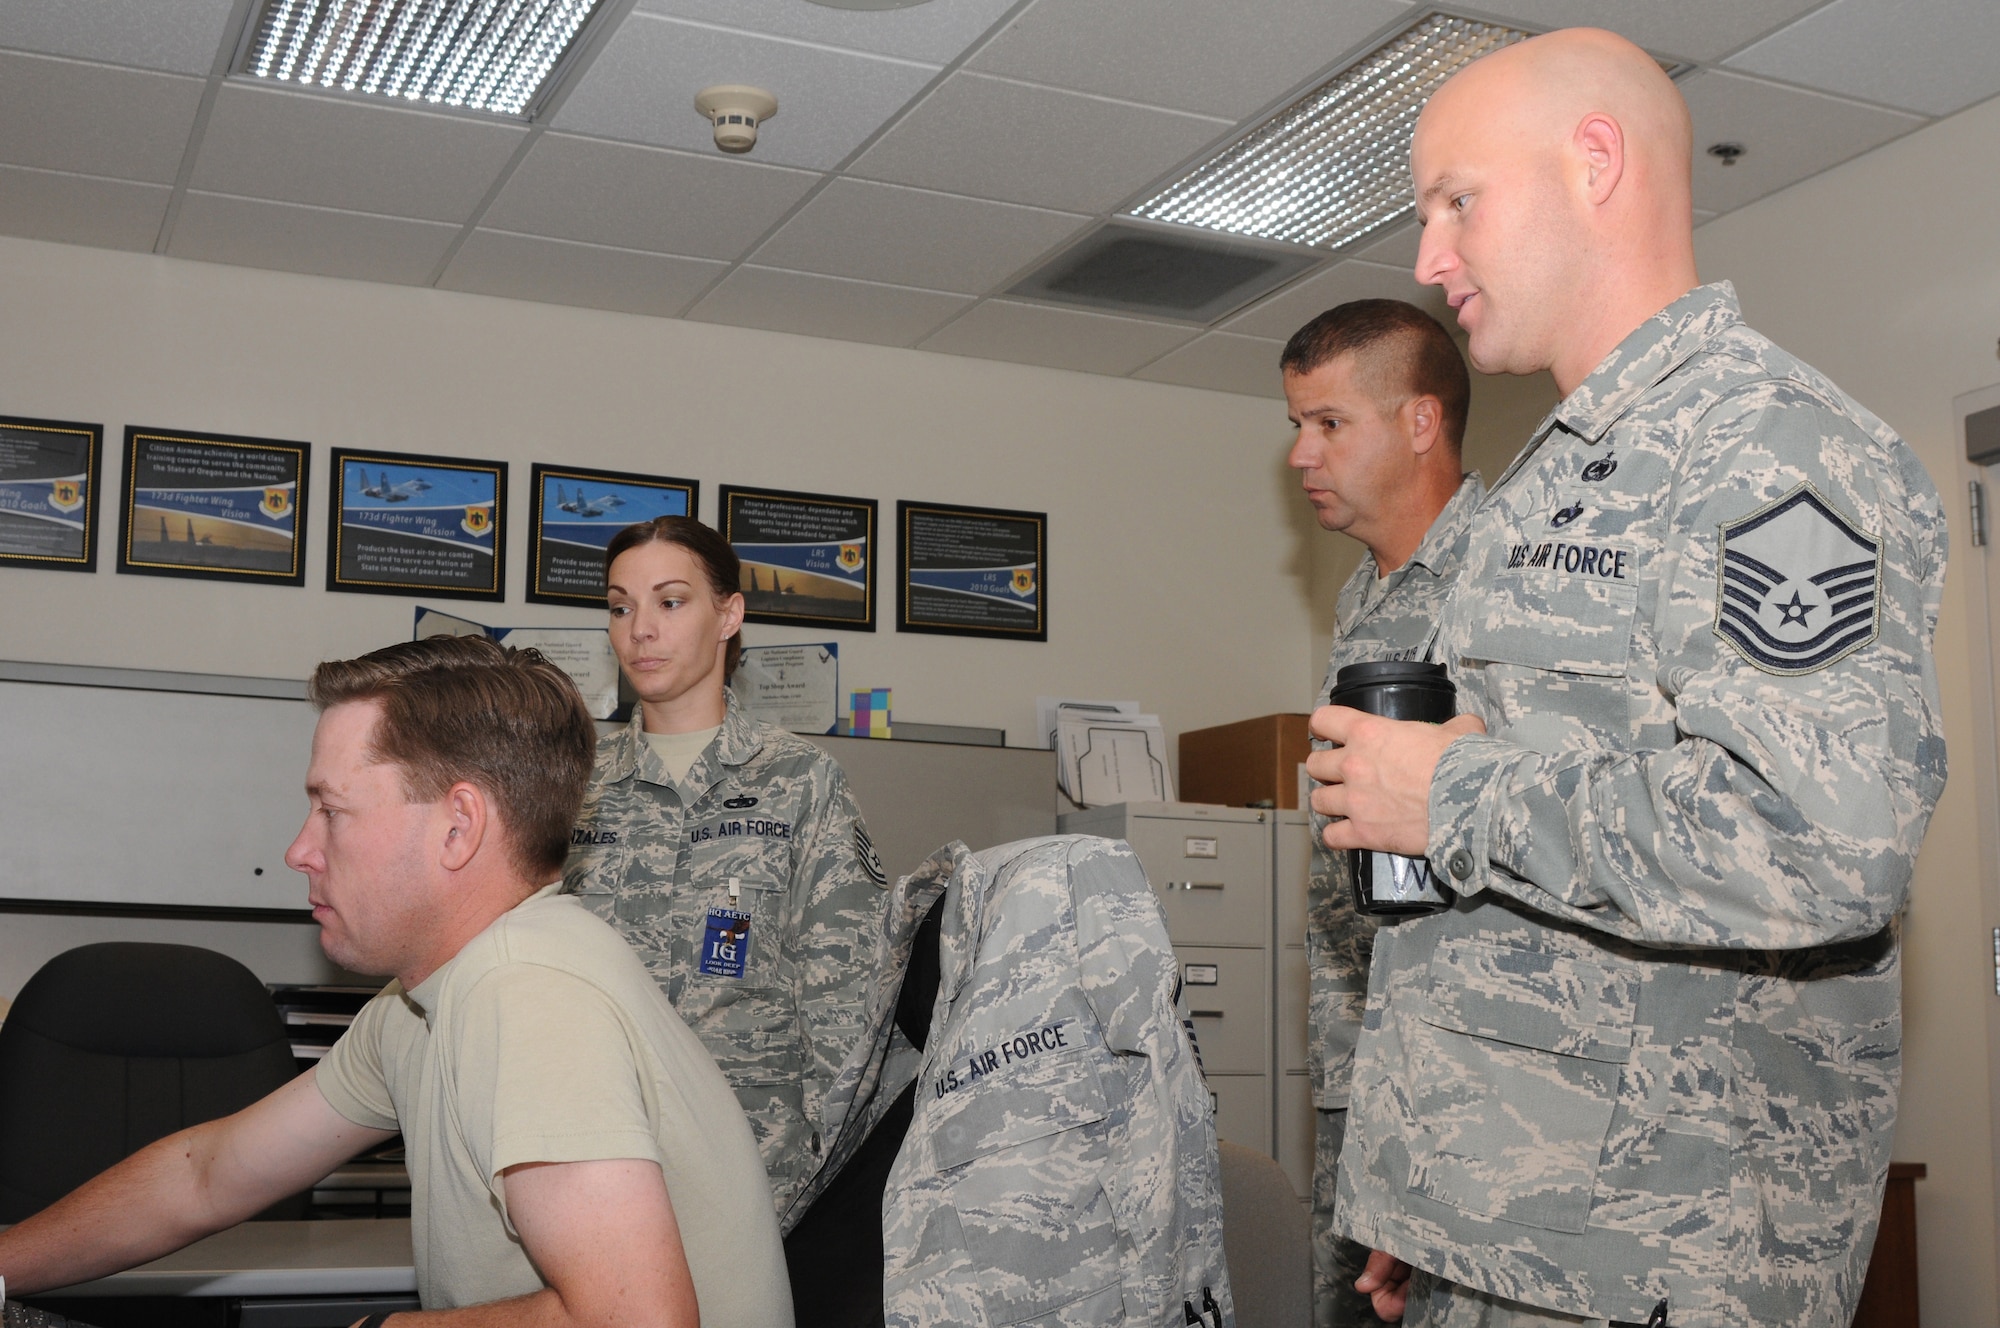 Master Sergeant Mike Loomis, Master Sergeant Jason Witts and Senior Master Sergeant Joe Oyler, 173rd Fighter Wing Traffic Management Flight, are inspected by a member of the Unit Compliance Inspection team at Kingsley Field, Ore., September 18, 2010.  Kingsley Field has been under the microscope by the UCI team this week to ensure the base is performing up to Air Force standards.  (U.S. Air Force photo by Senior Airman Bryan Nealy.) Released